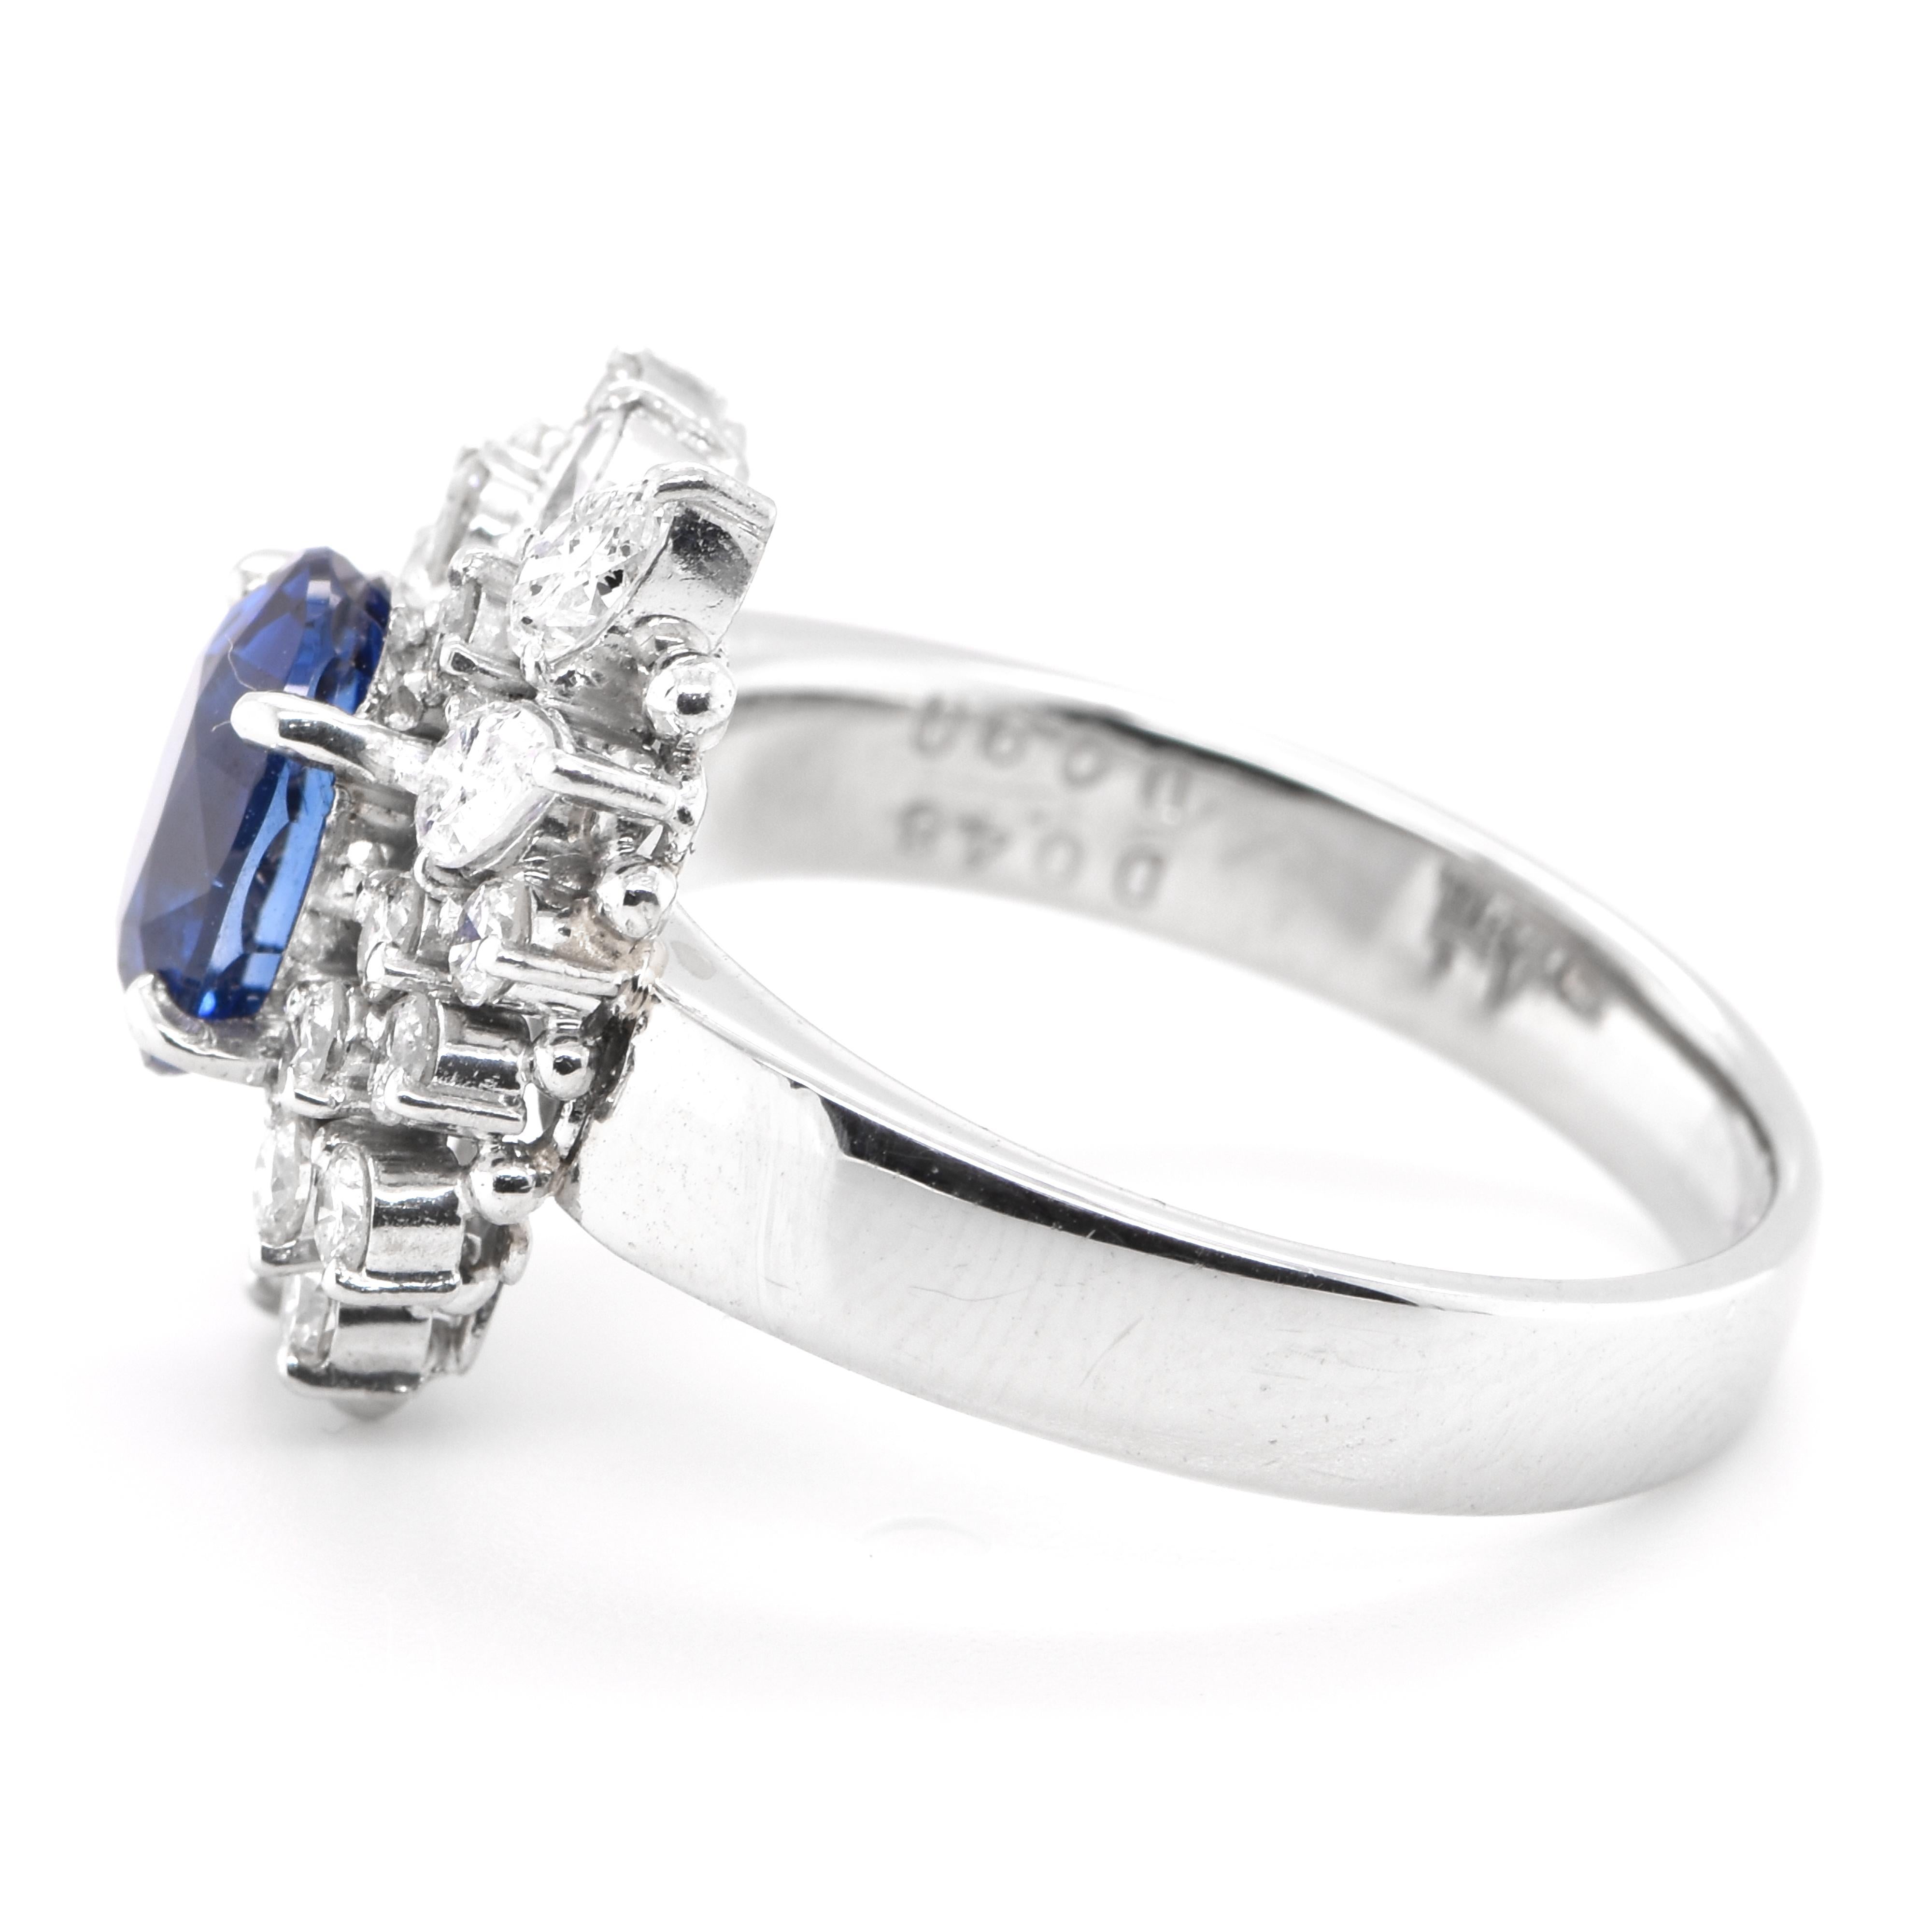 Oval Cut GIA Certified 2.30 Carat Natural Madagascar Sapphire Ring Set in Platinum